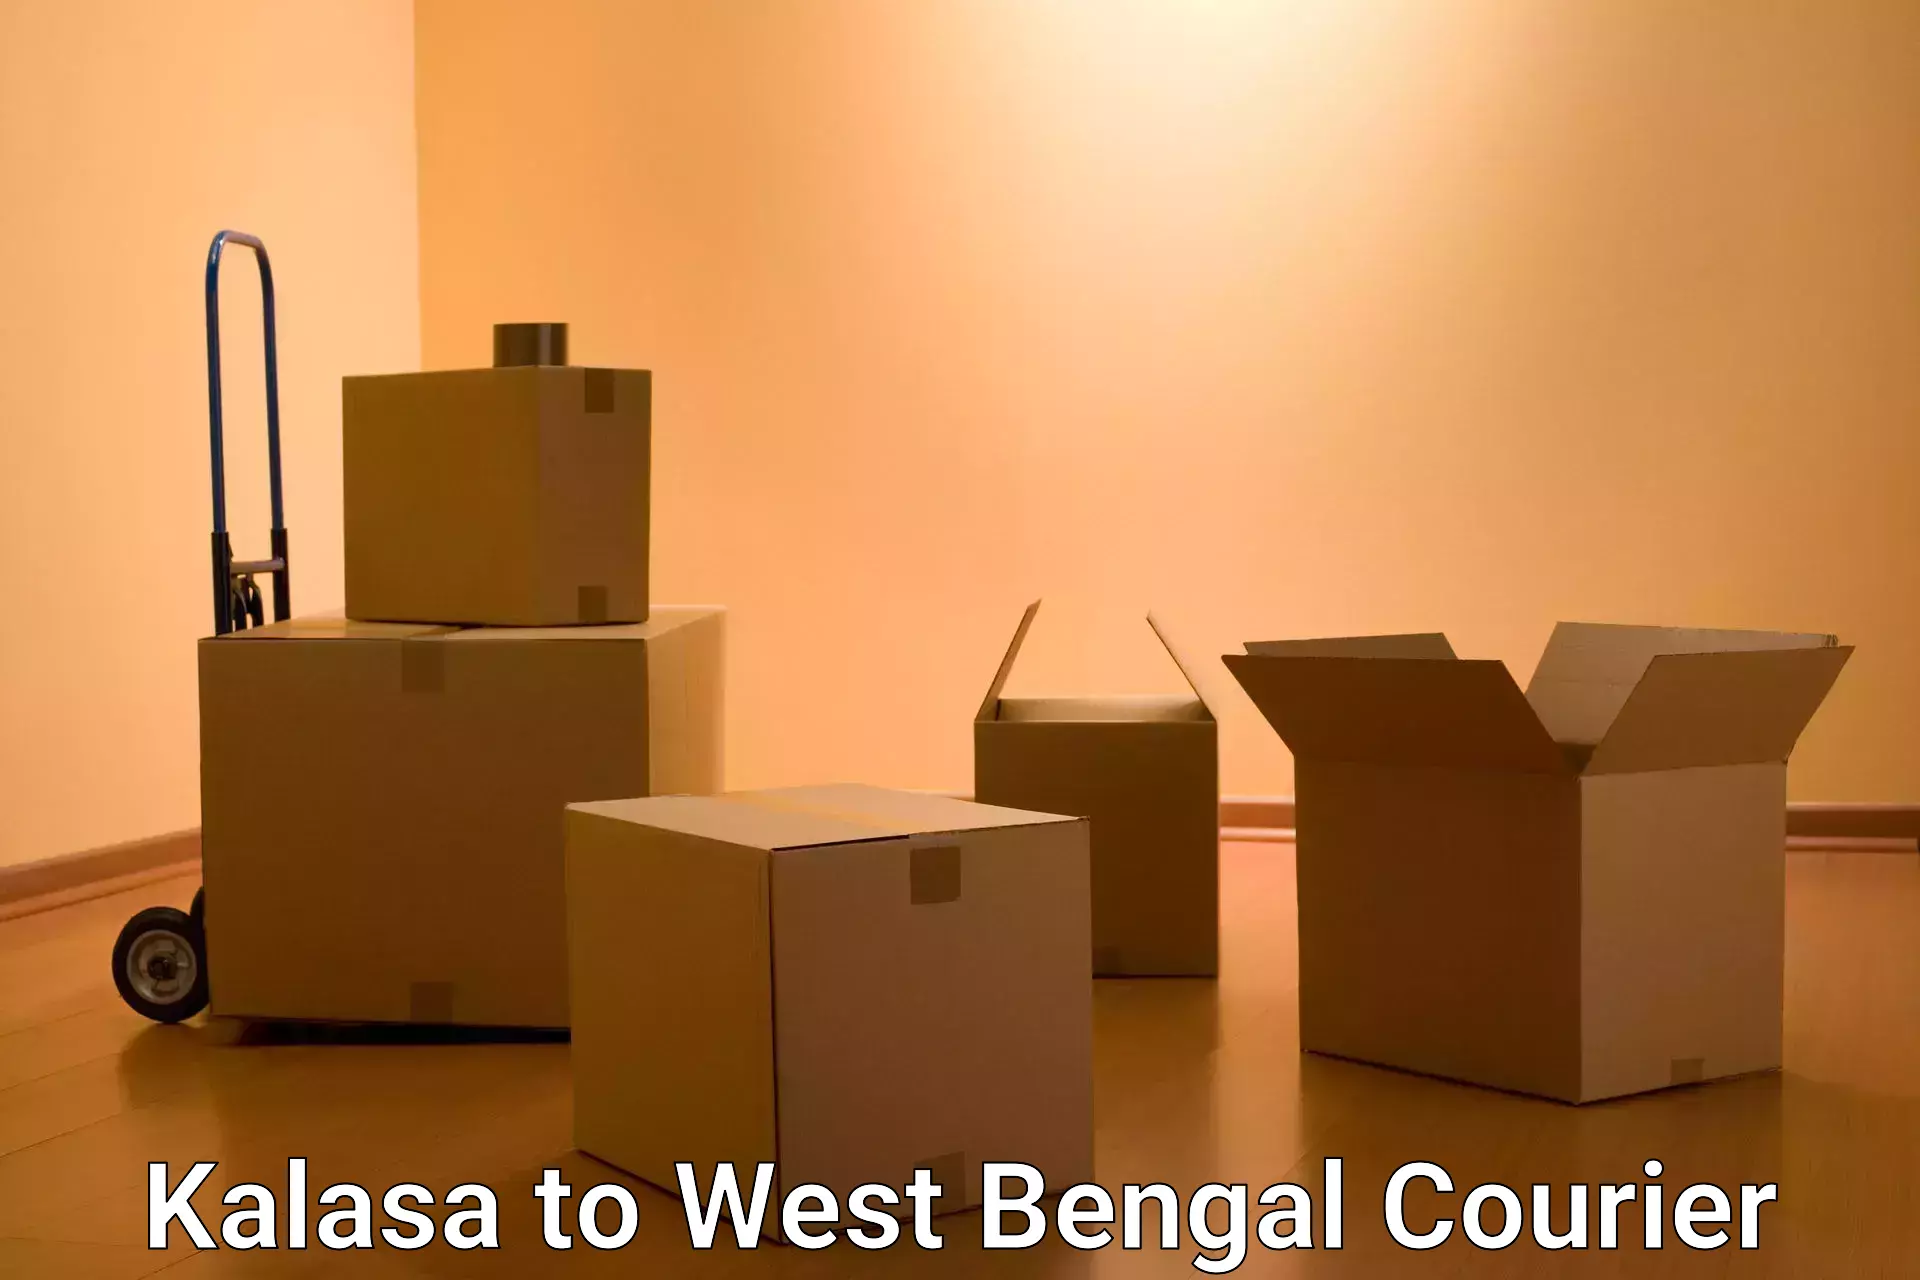 Speedy delivery service Kalasa to West Bengal